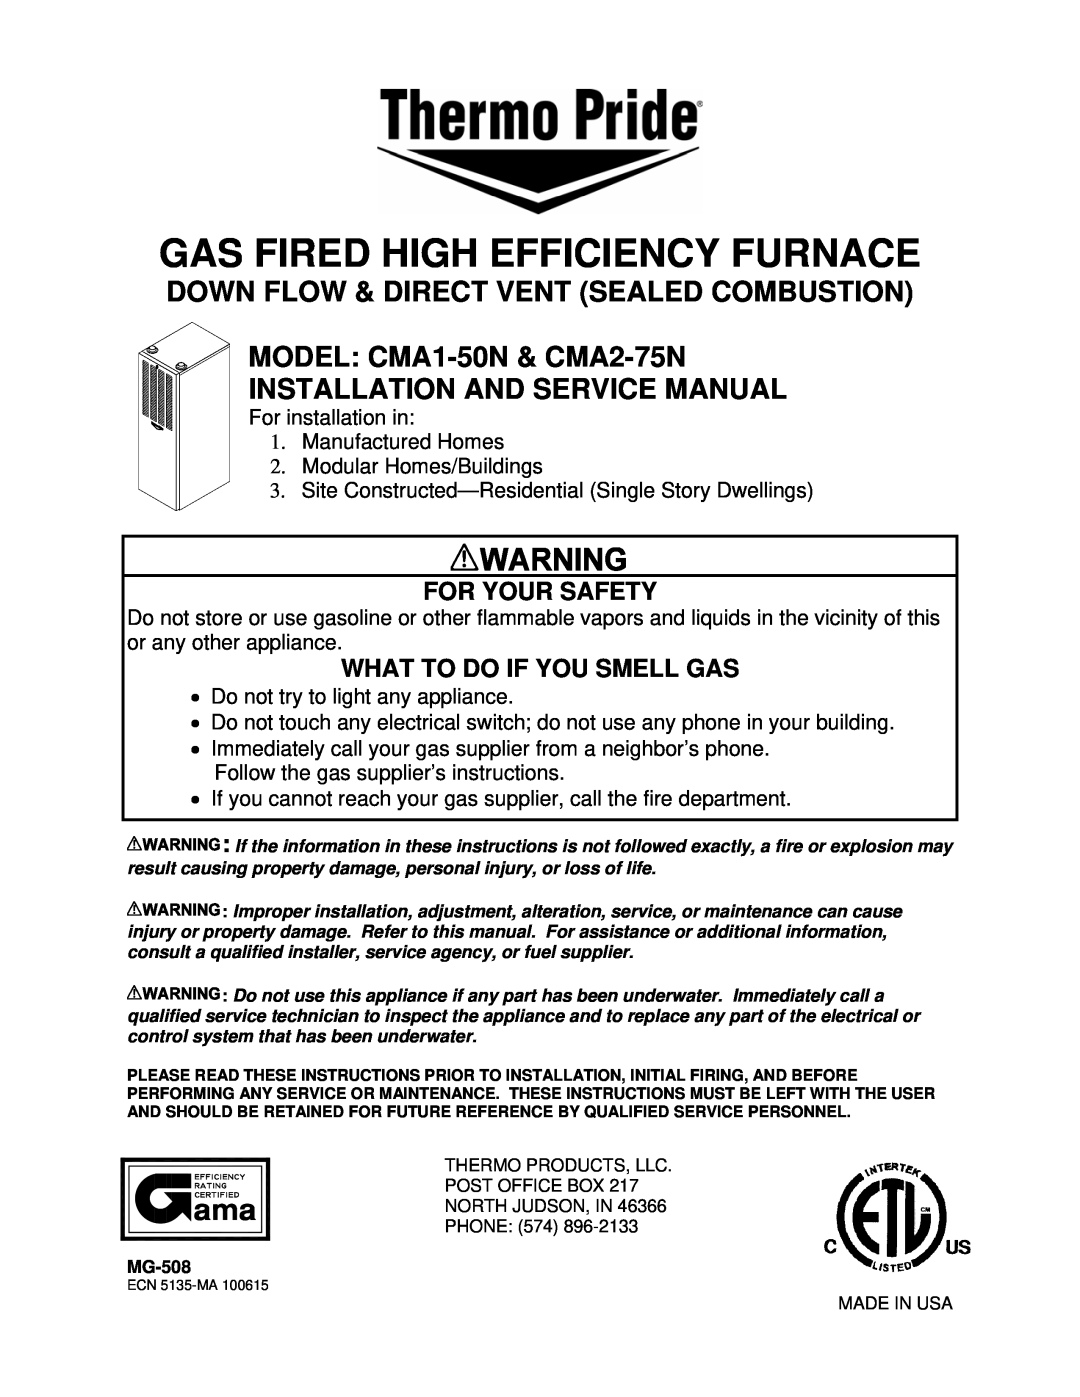 Thermo Products CMA1-50N service manual Gas Fired High Efficiency Furnace, Down Flow & Direct Vent Sealed Combustion 